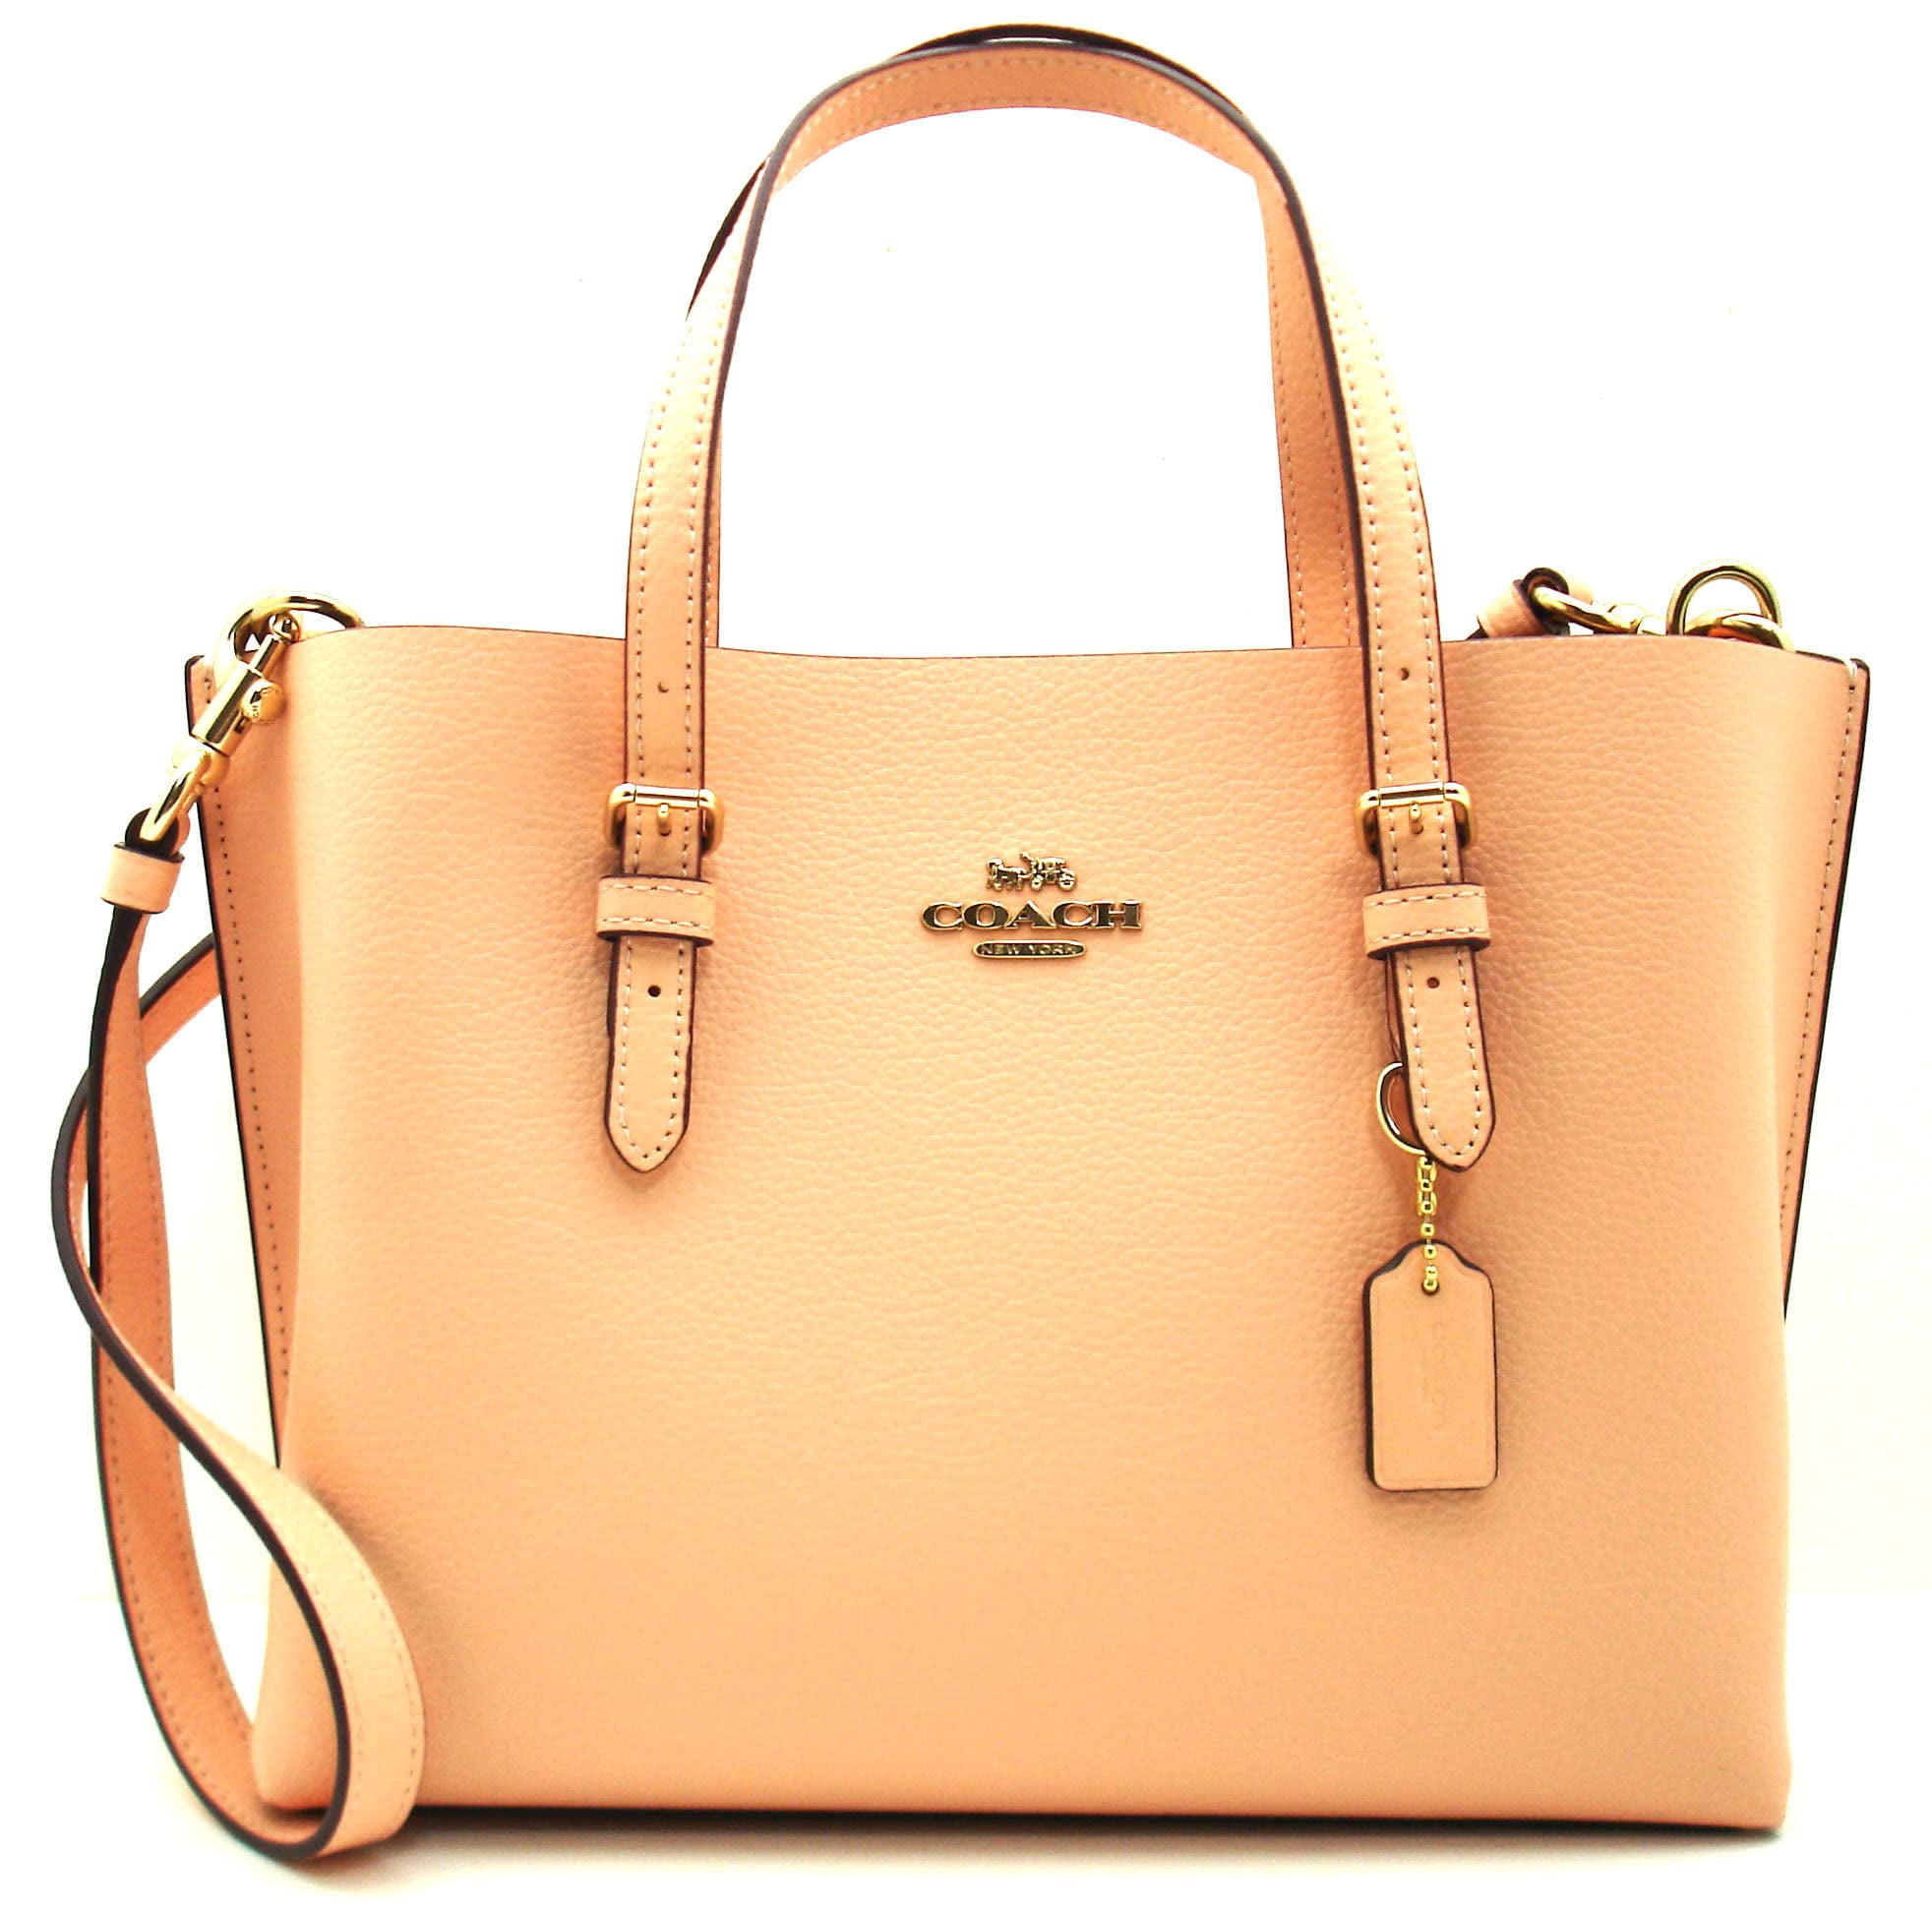 Coach Mollie Pebbled Leather Tote